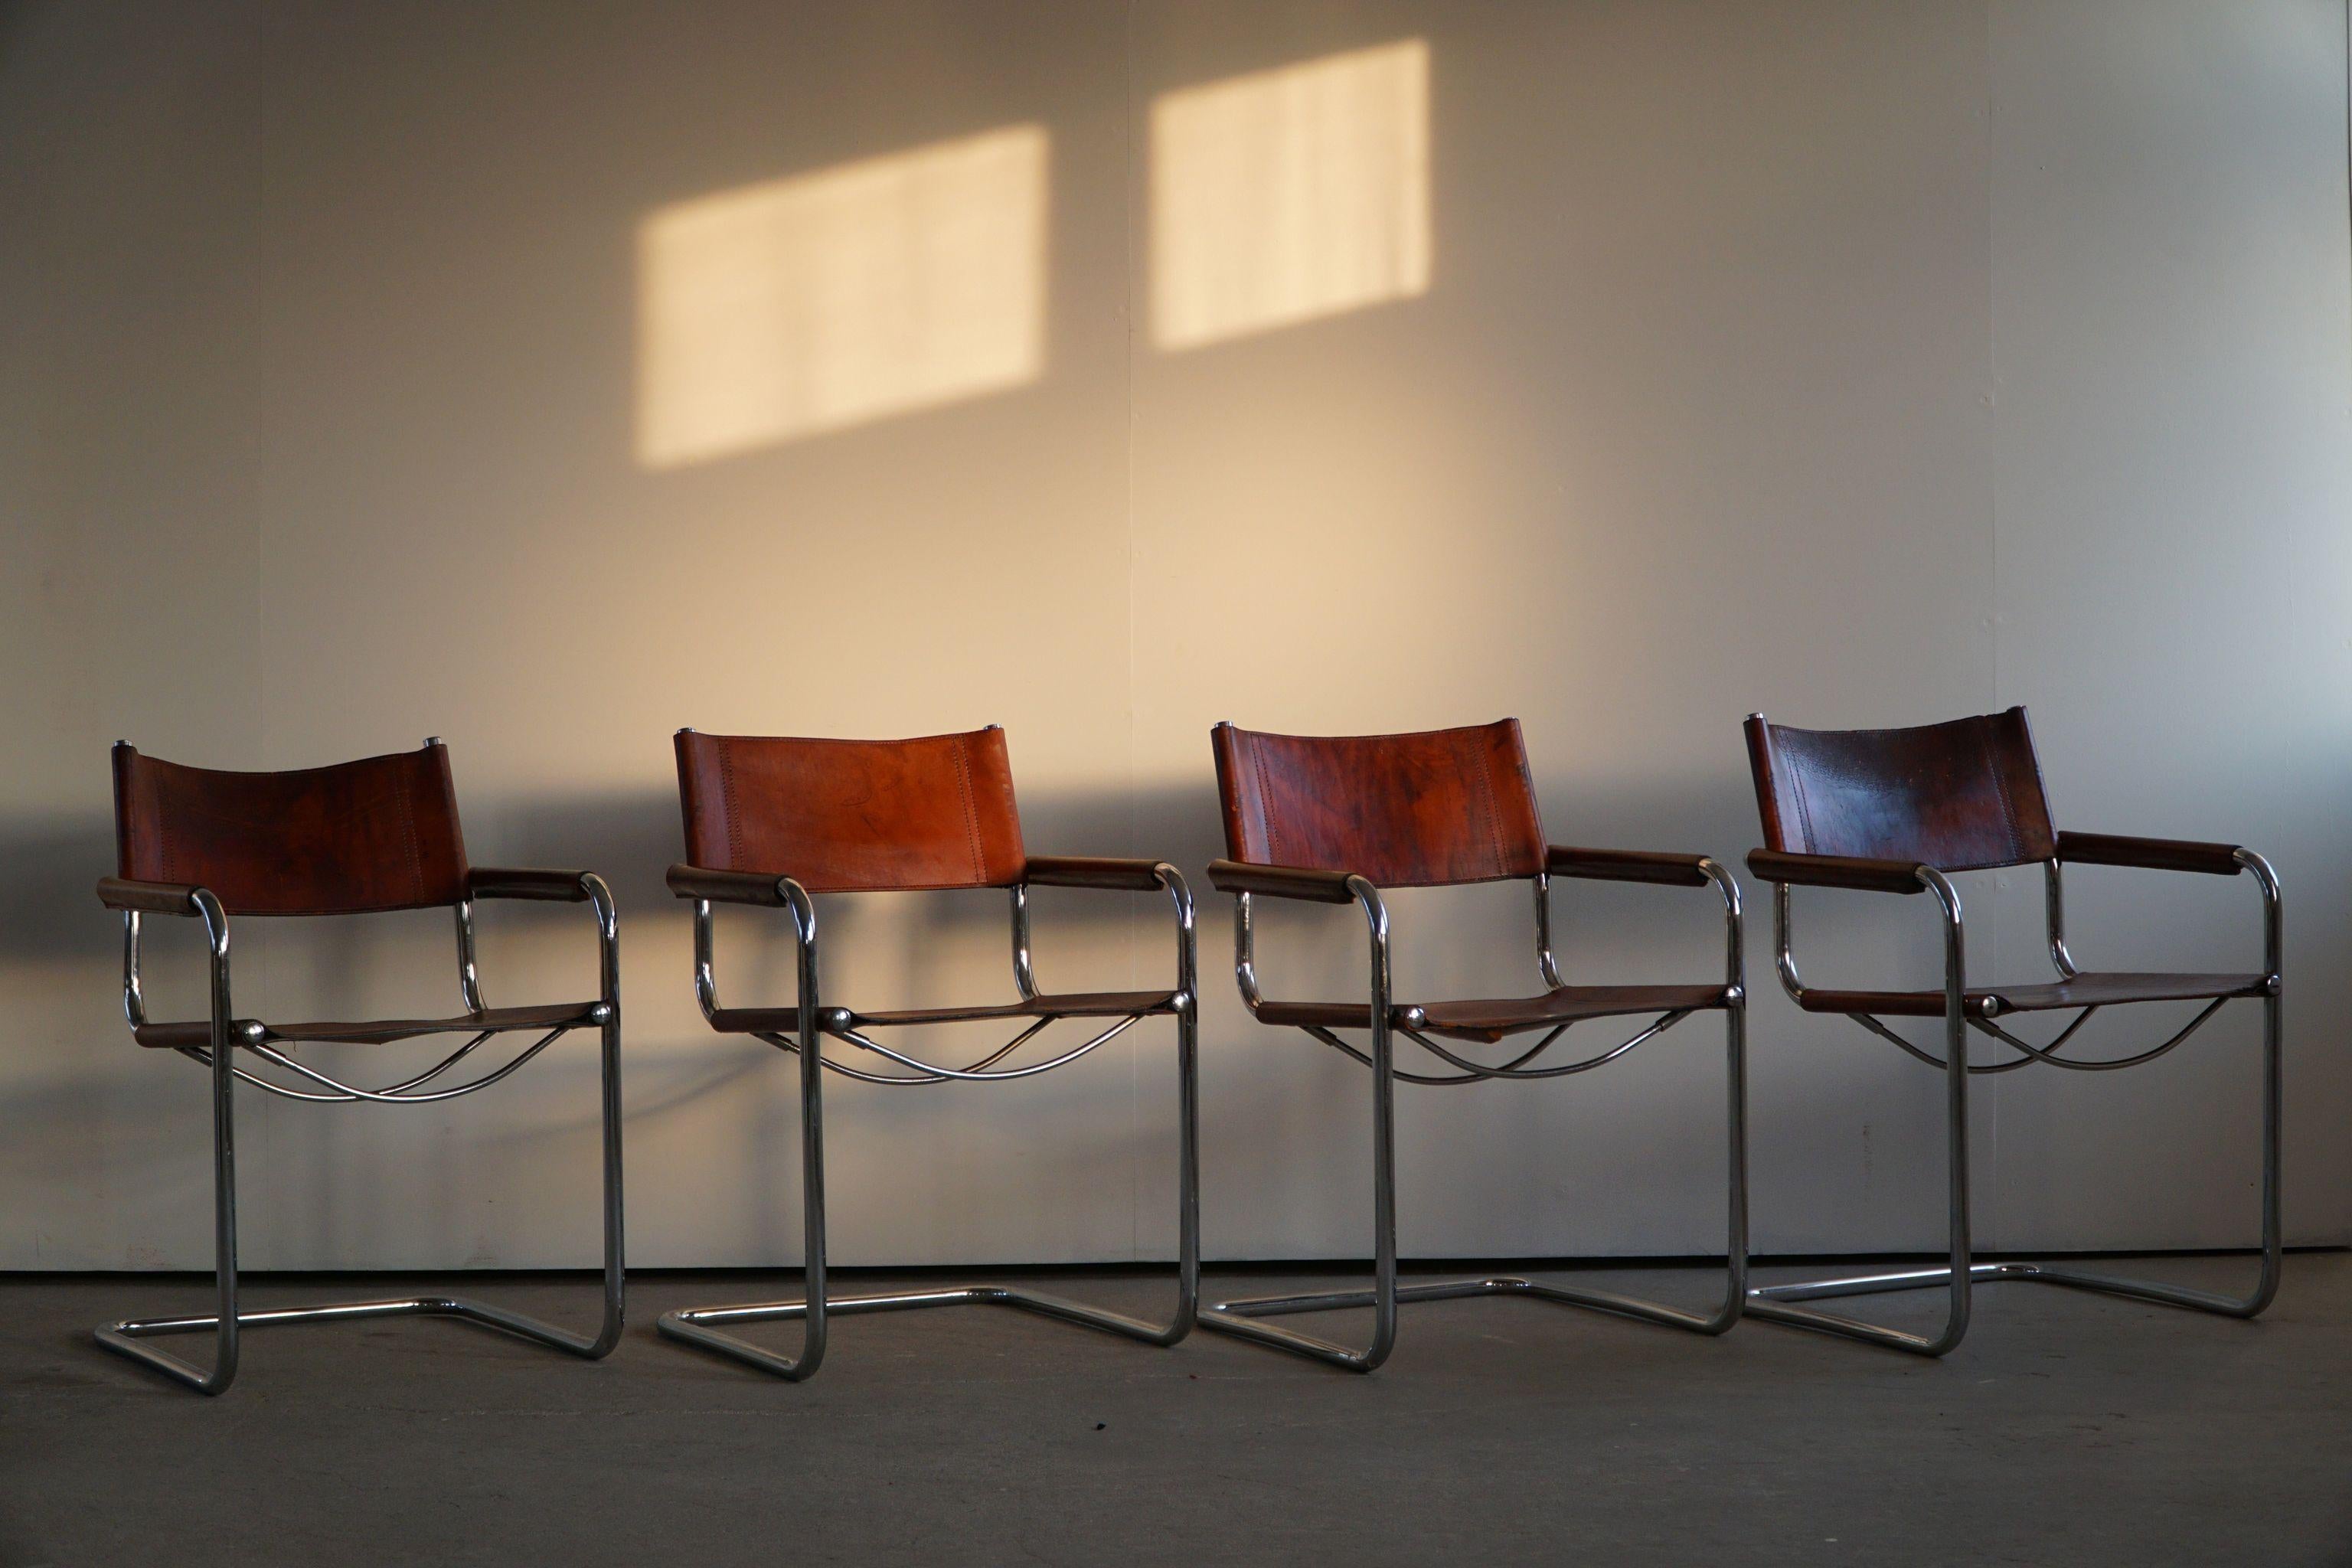 Set of 4 Vintage cantilever armchairs in patinated orange / cognac leather by Linea Veam, made in Italy, 1970s. The chairs are strongly reminiscent of bauhaus works by Mart Stam and Marcel Breuer. 

A nice set perfectly suited for many interior